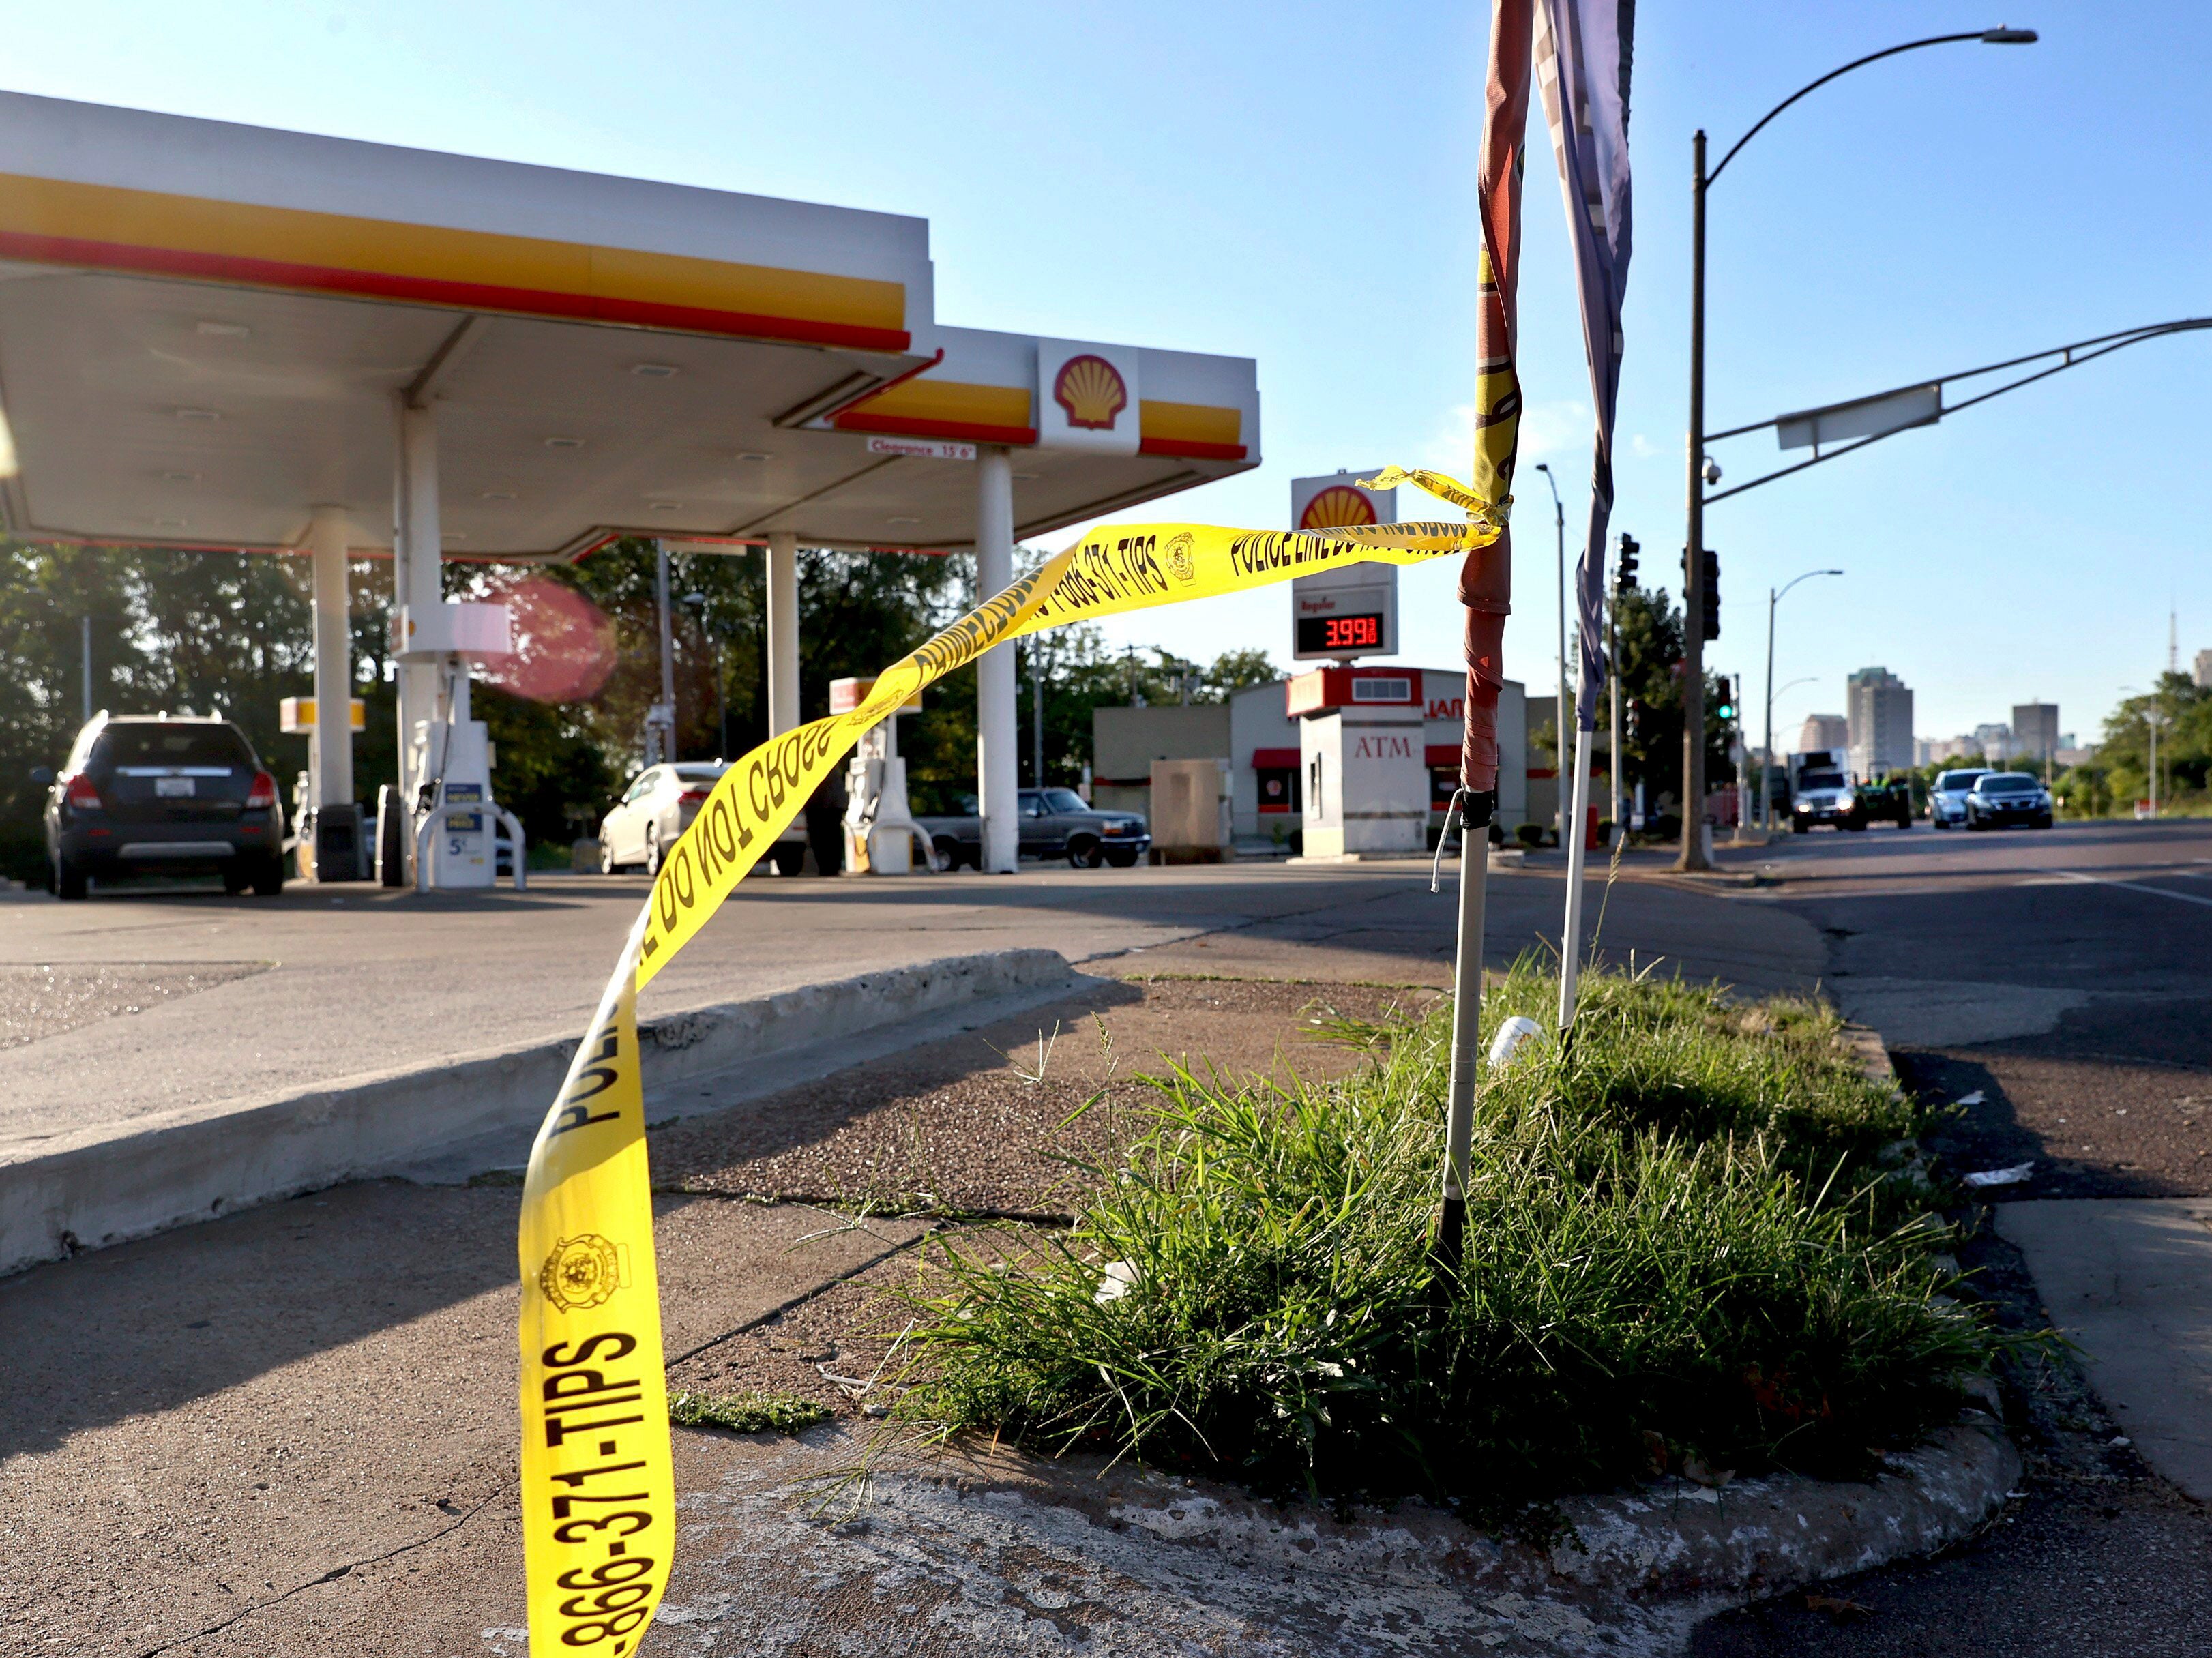 The Shell gas station where Darryl Ross, 16, was shot by police on Sunday 11 Sep 2022